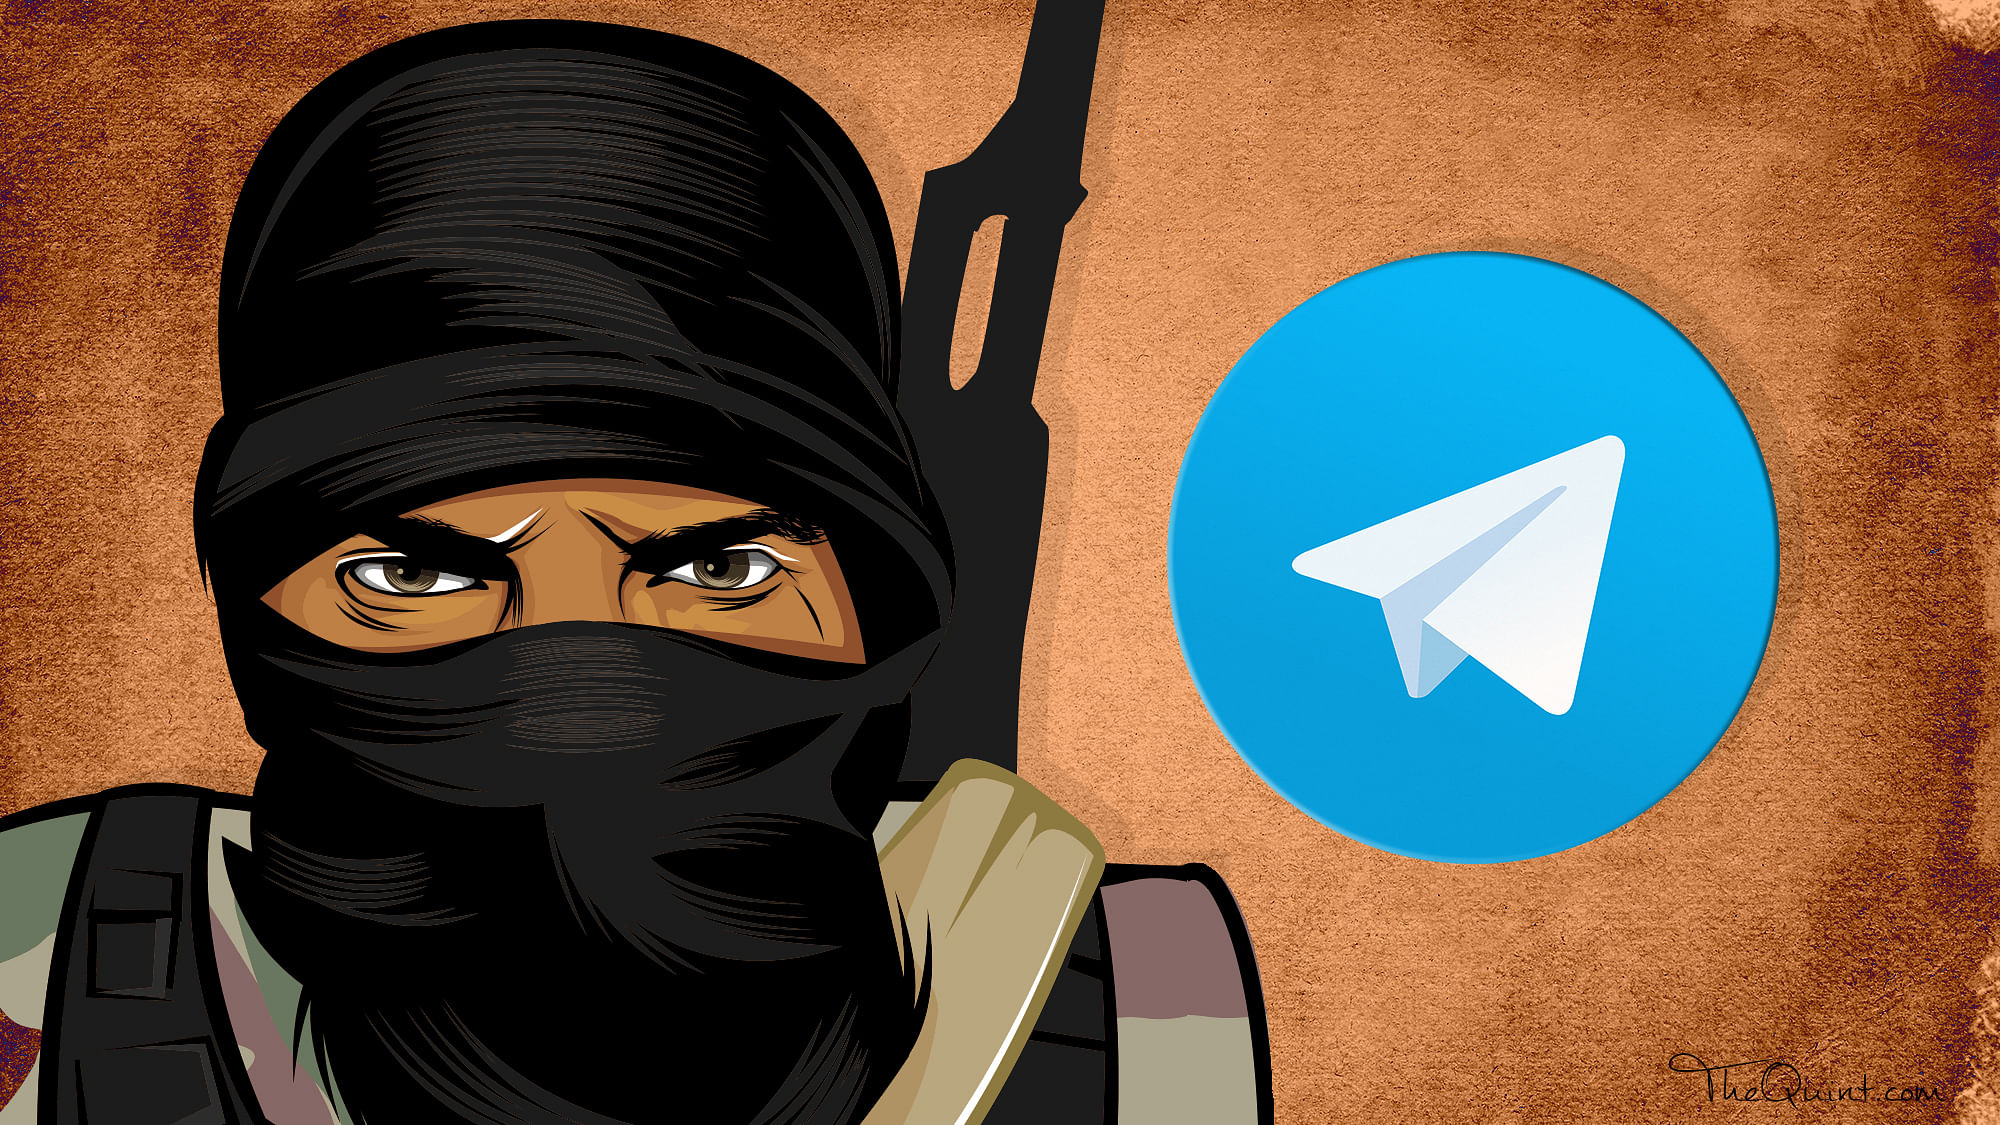 Telegram is often in the news for being one of ISIS’ most used apps to spread its hateful propaganda. (Photo: Rhythum Seth/<b>The Quint</b>)